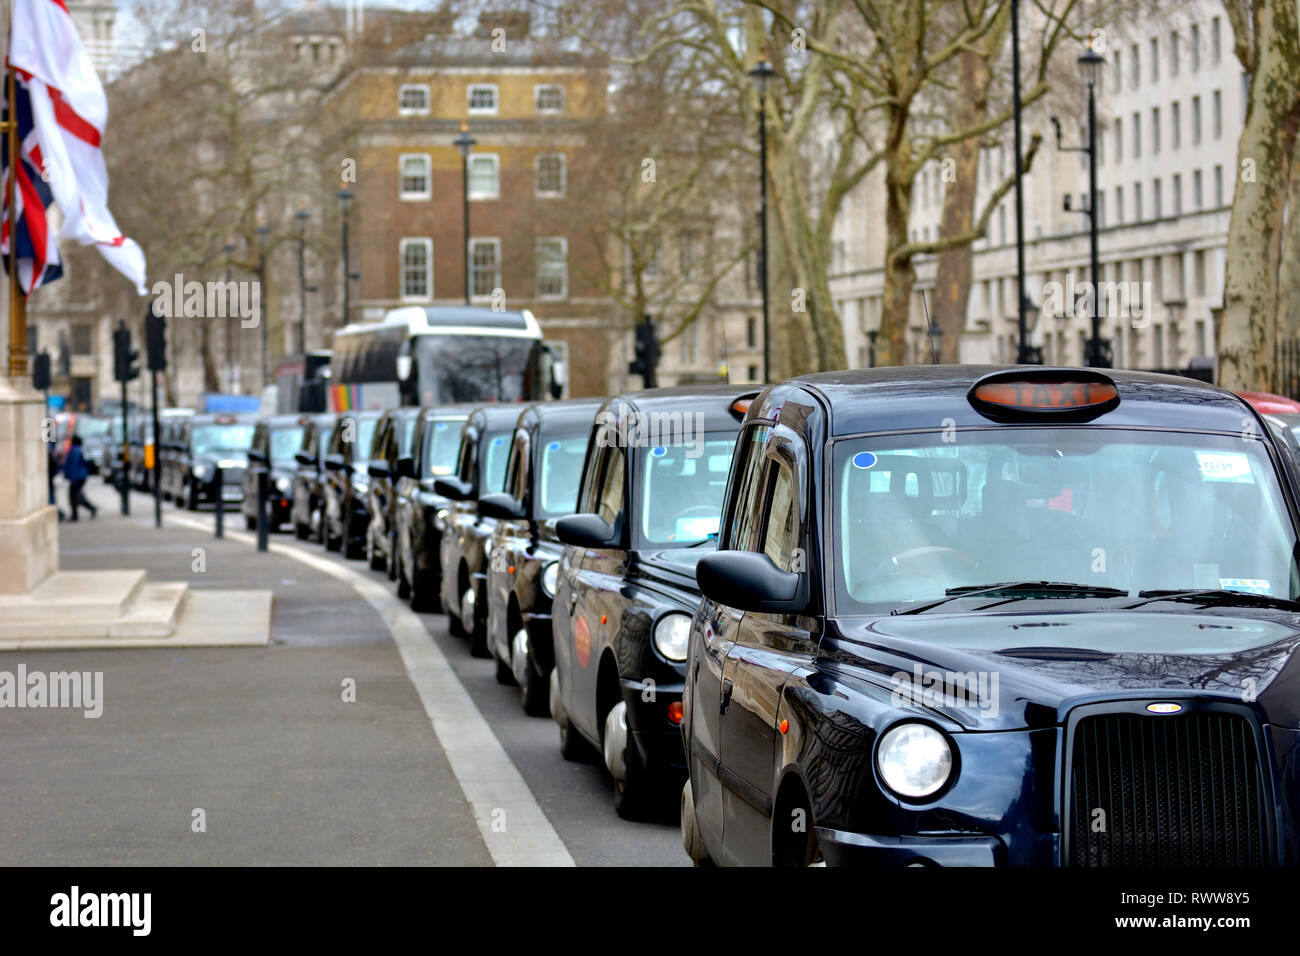 London, England, UK. Taxis lined up in Whitehall during a protest against Mayor Sadiq Khan's plans to limit their access to certain areas of central L Stock Photo